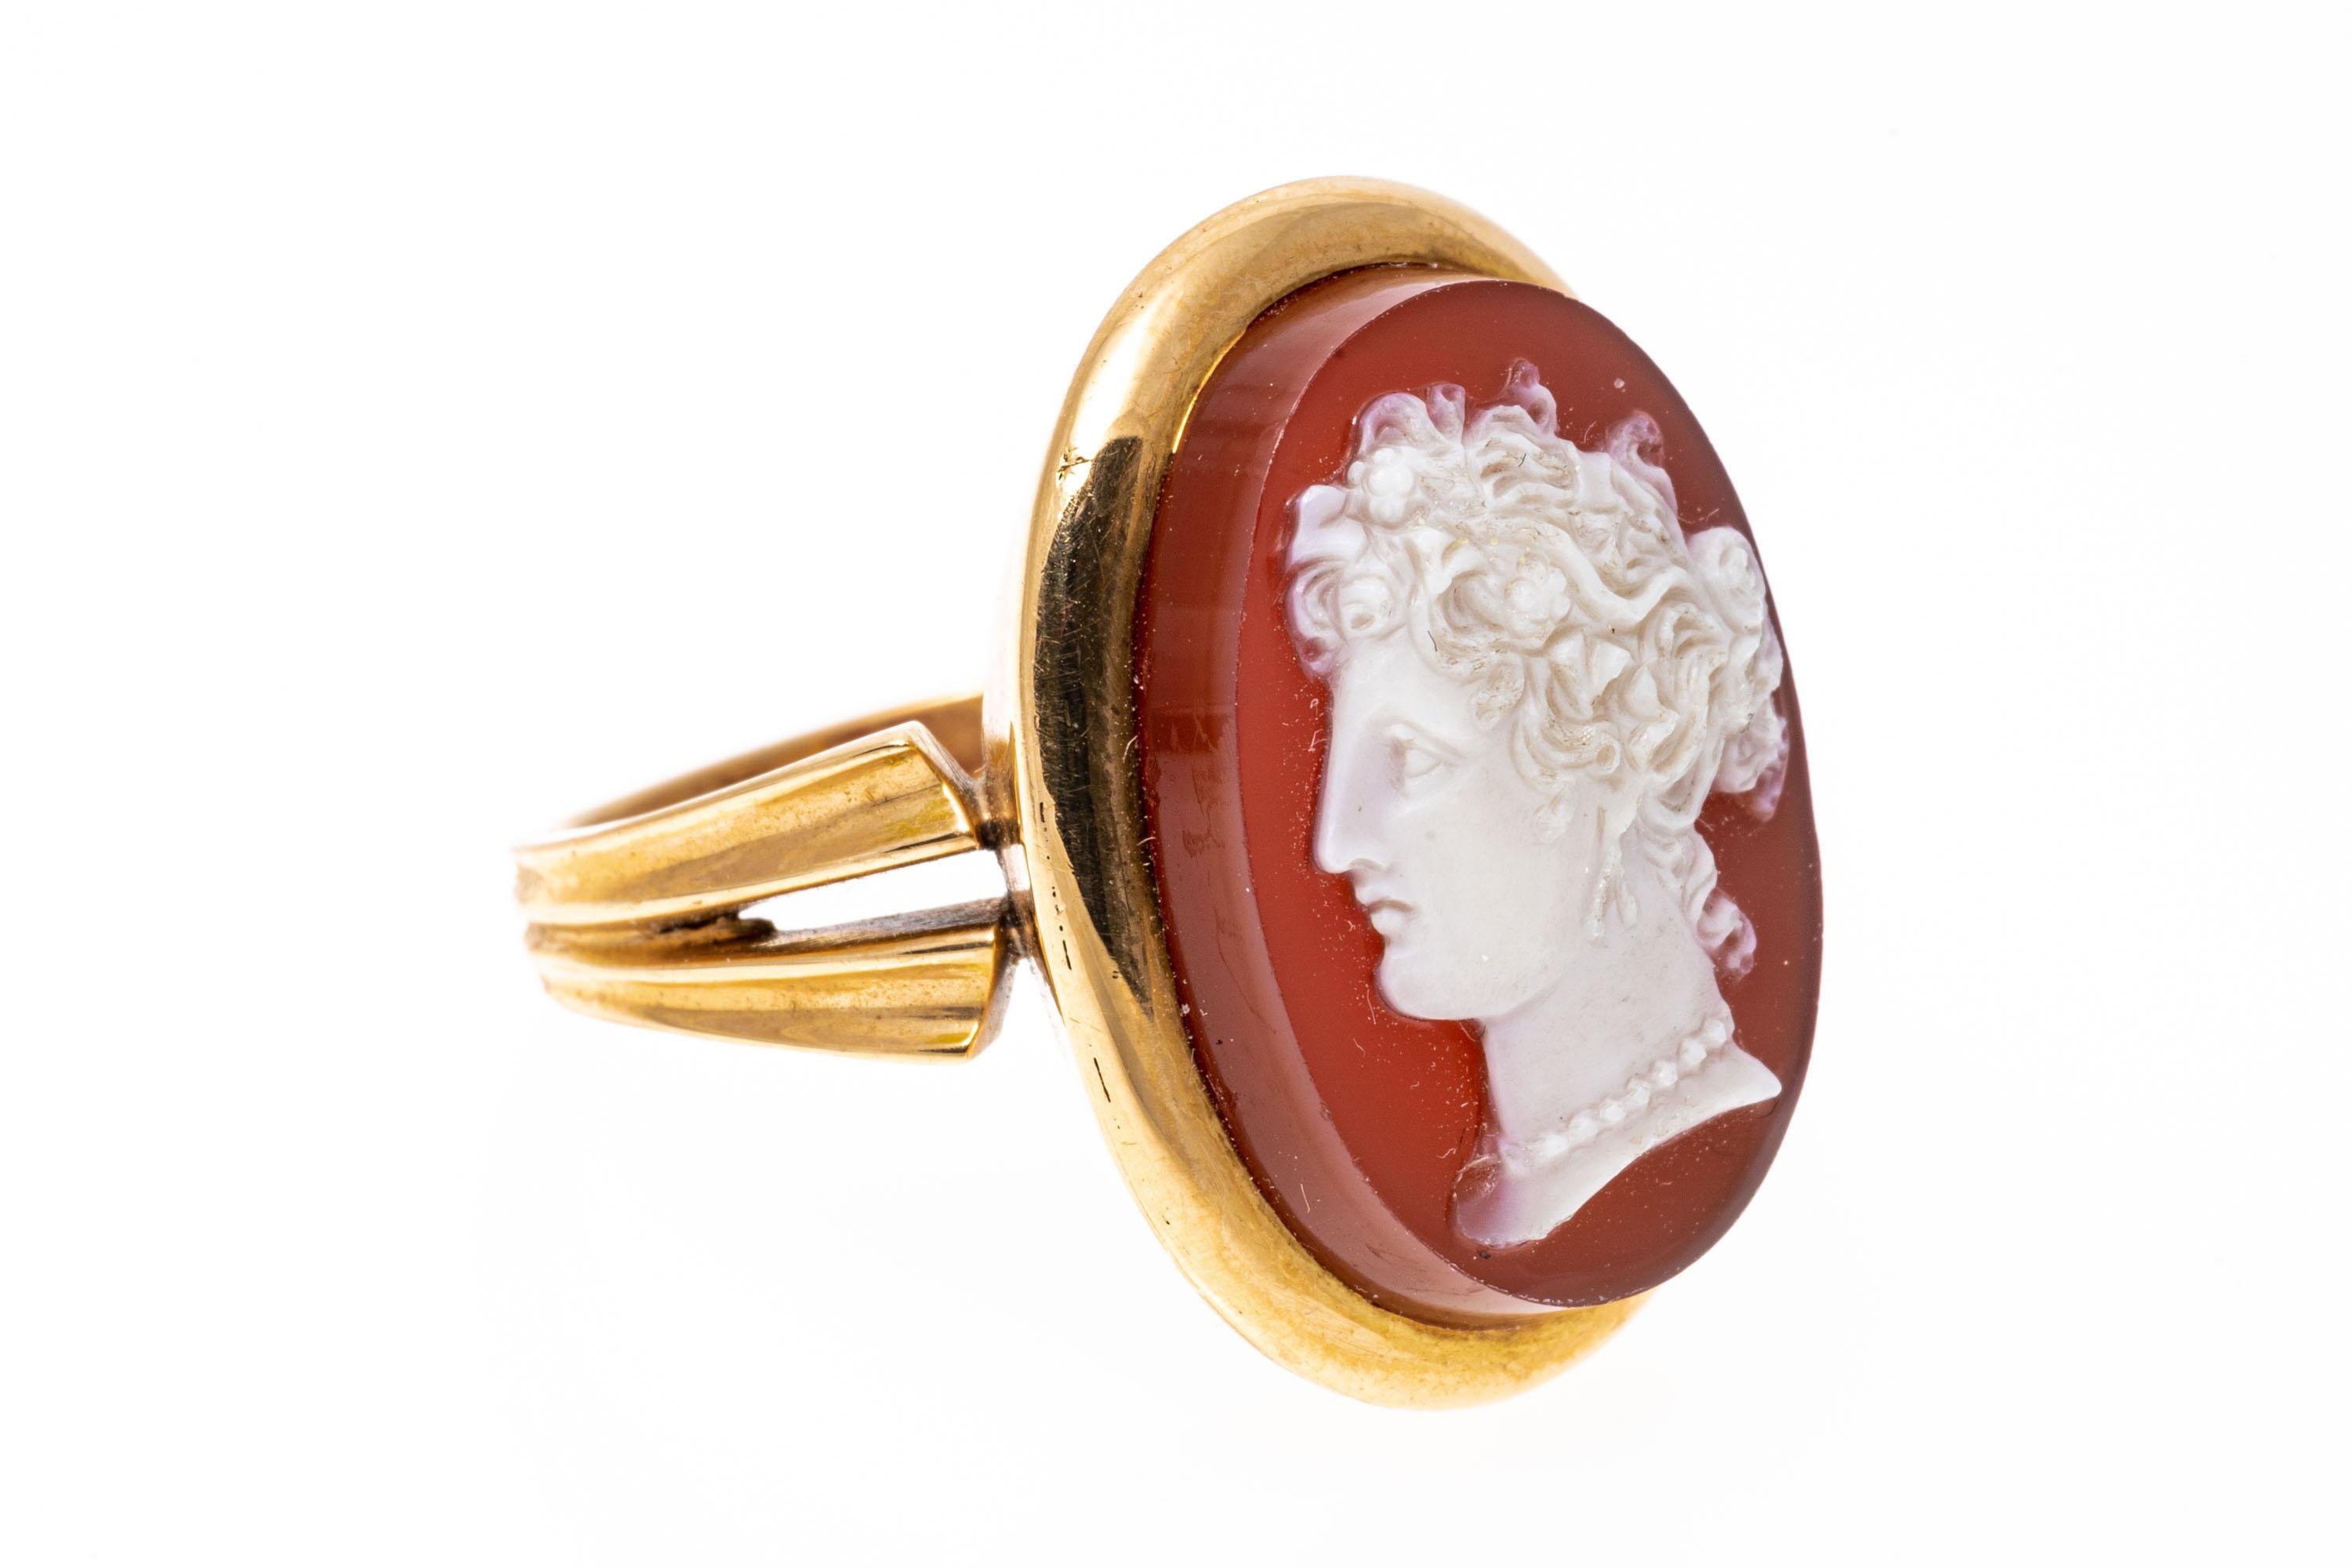 18k rose gold ring. This beautiful vintage oval cameo ring has an orange background with a creamy white foreground of a handsome classic silhouette, facing to the left, and set off with a wide, high polished frame. The ring is also adorned with a